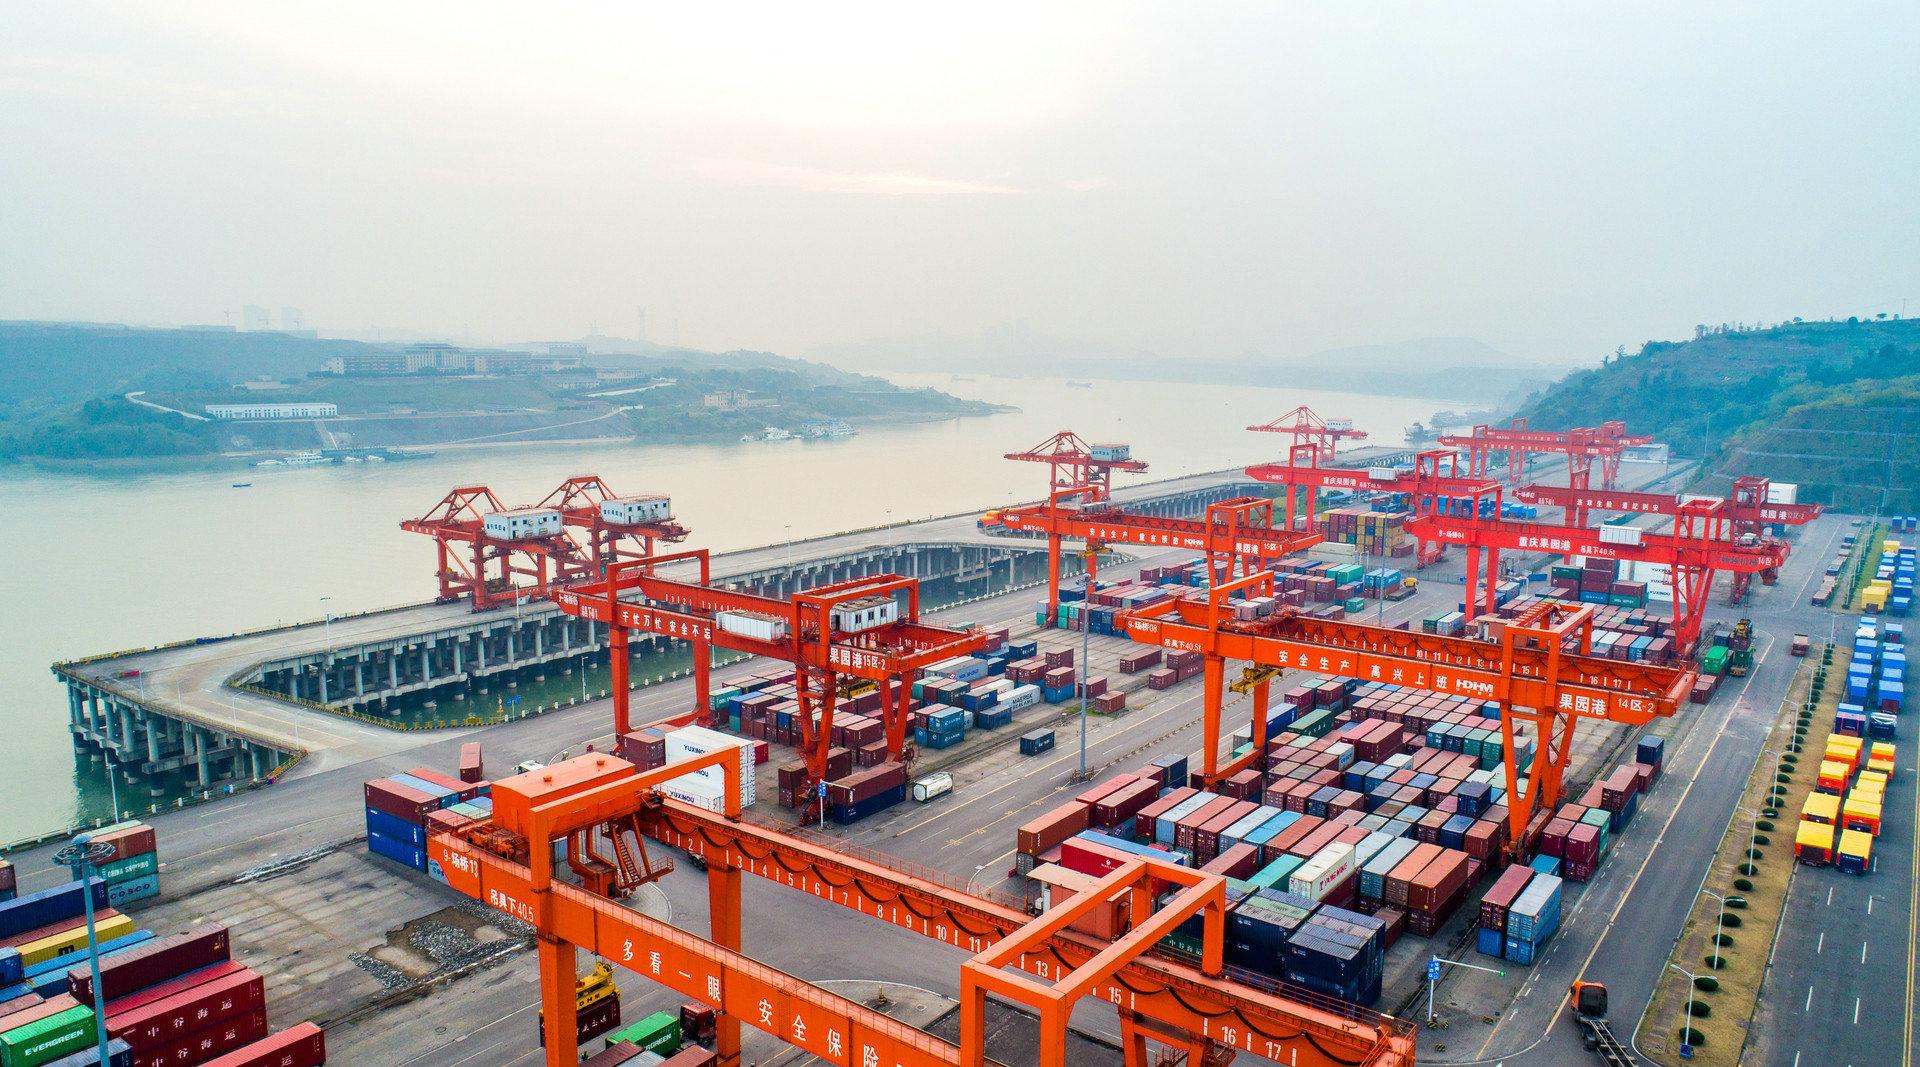 Qingdao Port has started construction of its second 300,000 tonne